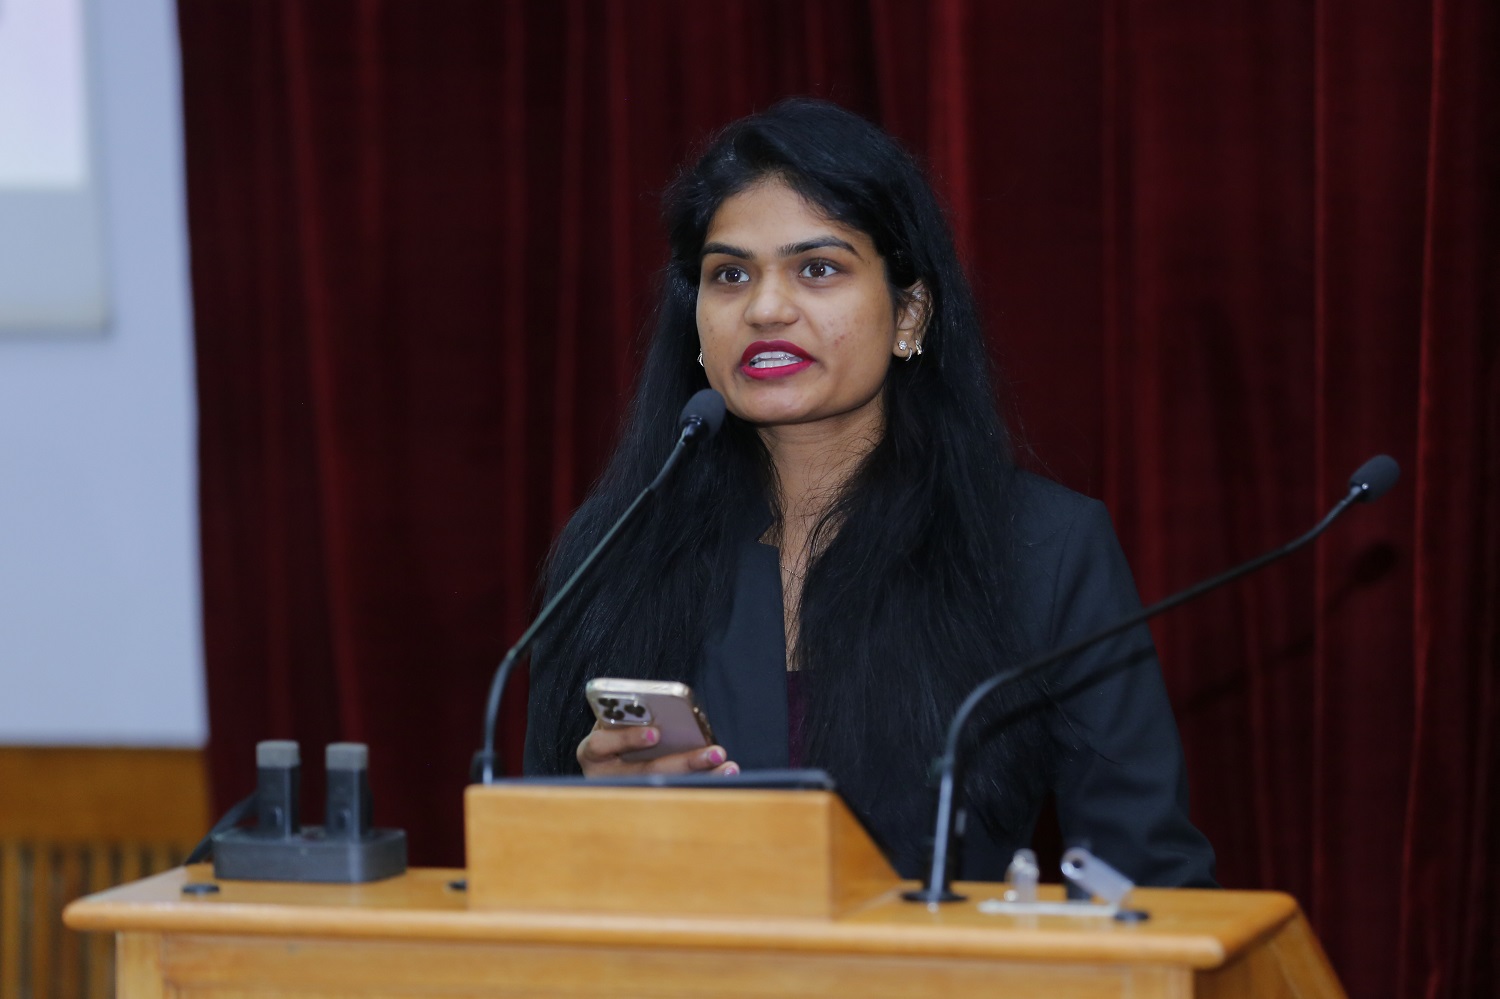 Prof. Spurthy Dharanikota, Program Chair (Academic Track) and faculty from the Information Systems area at IIMB, provides an overview of the International Software Product Management Summit 2024.